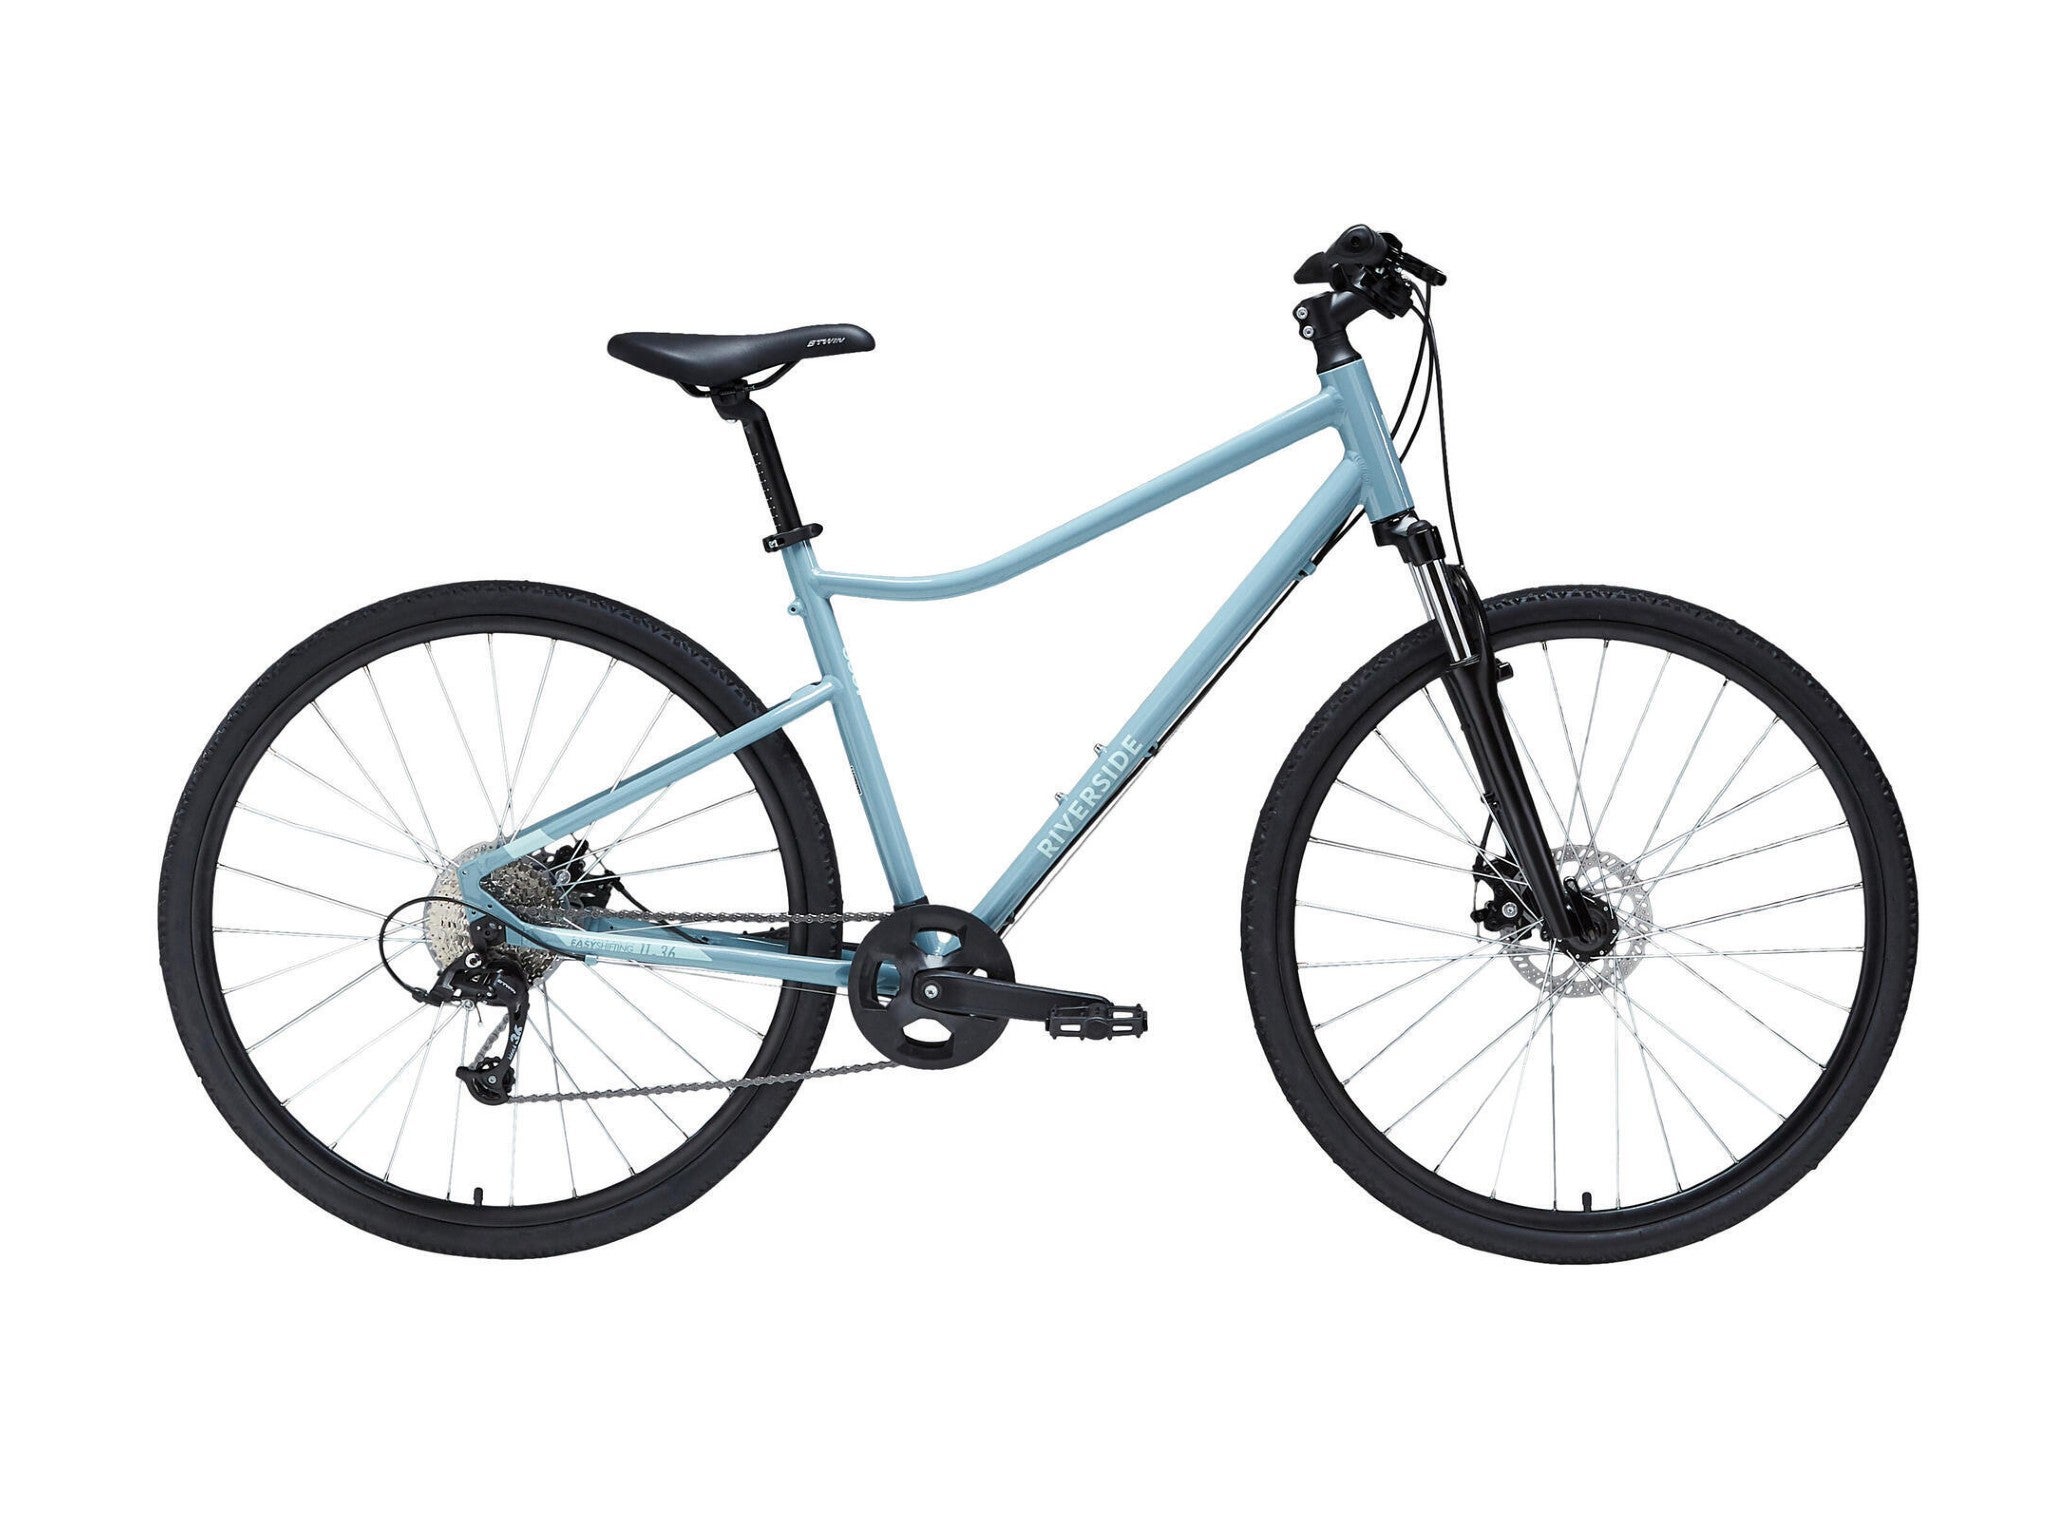 Decathlon’s riverside 500 was named “best first bike” in our women-specific hybrids roundup